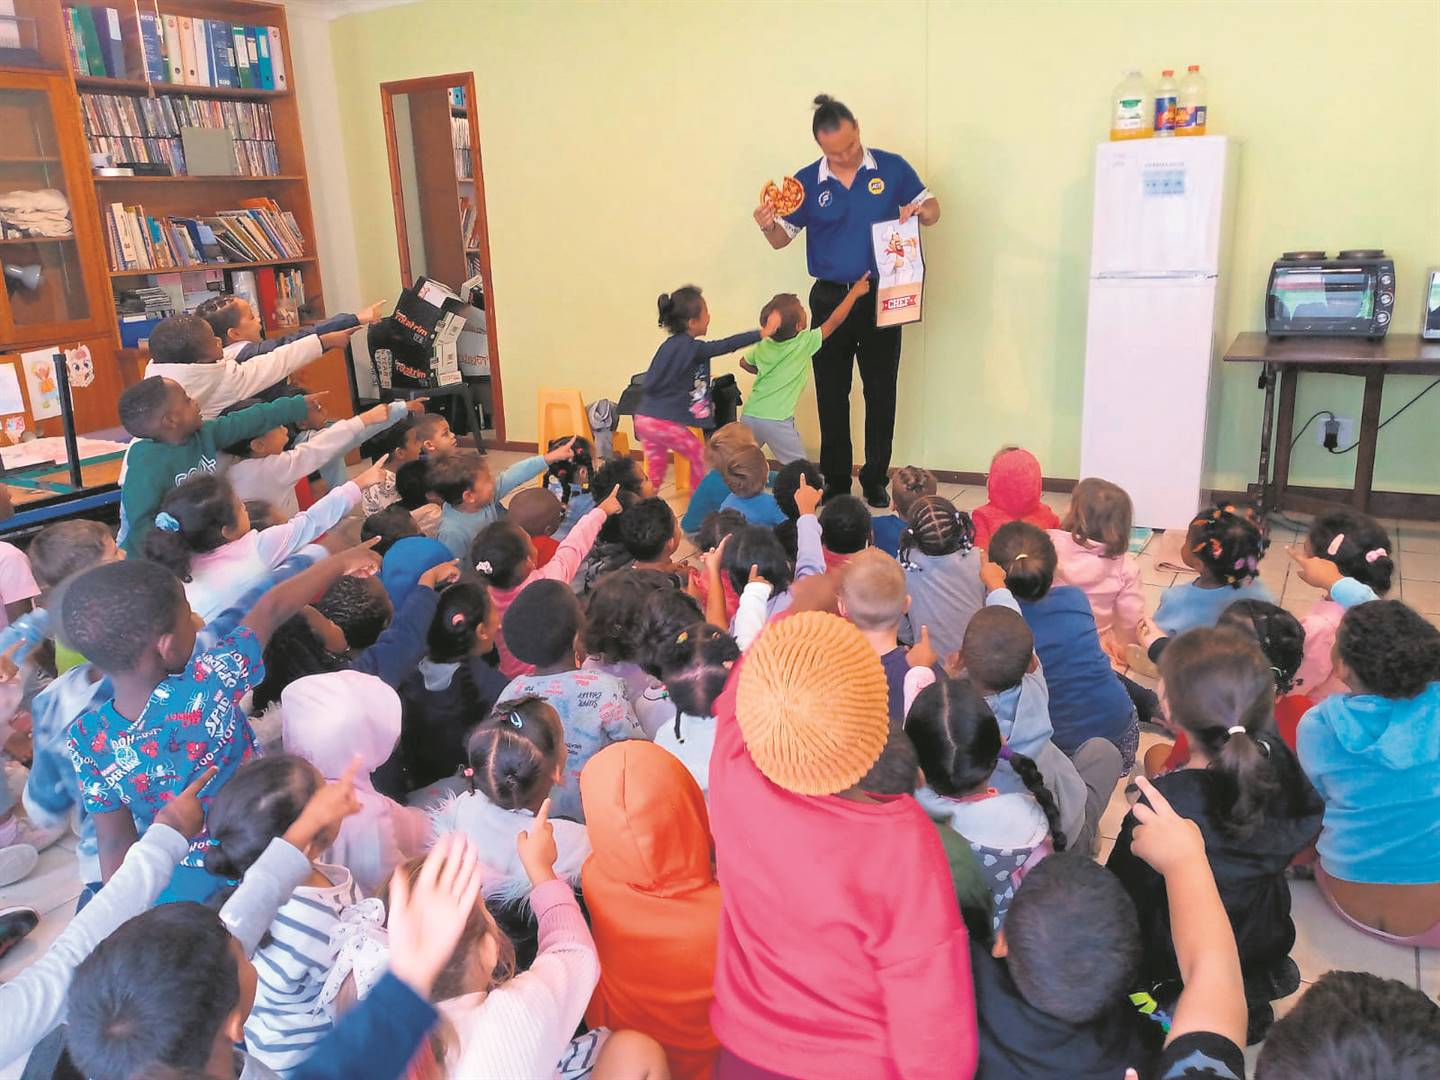 Learners from Kids Cove Nursery School in Gordon’s Bay enjoyed a fun security class held to promote safety at the school on Thursday (9 March). Regardt Laubscher, better known as “Mr ADT”, visited the school to entertain the children with his charm, laughter and magic. There was a serious side to the day too as he taught them important personal safety lessons. Laubscher’s visit was organised in cooperation with the local Fidelity ADT team.